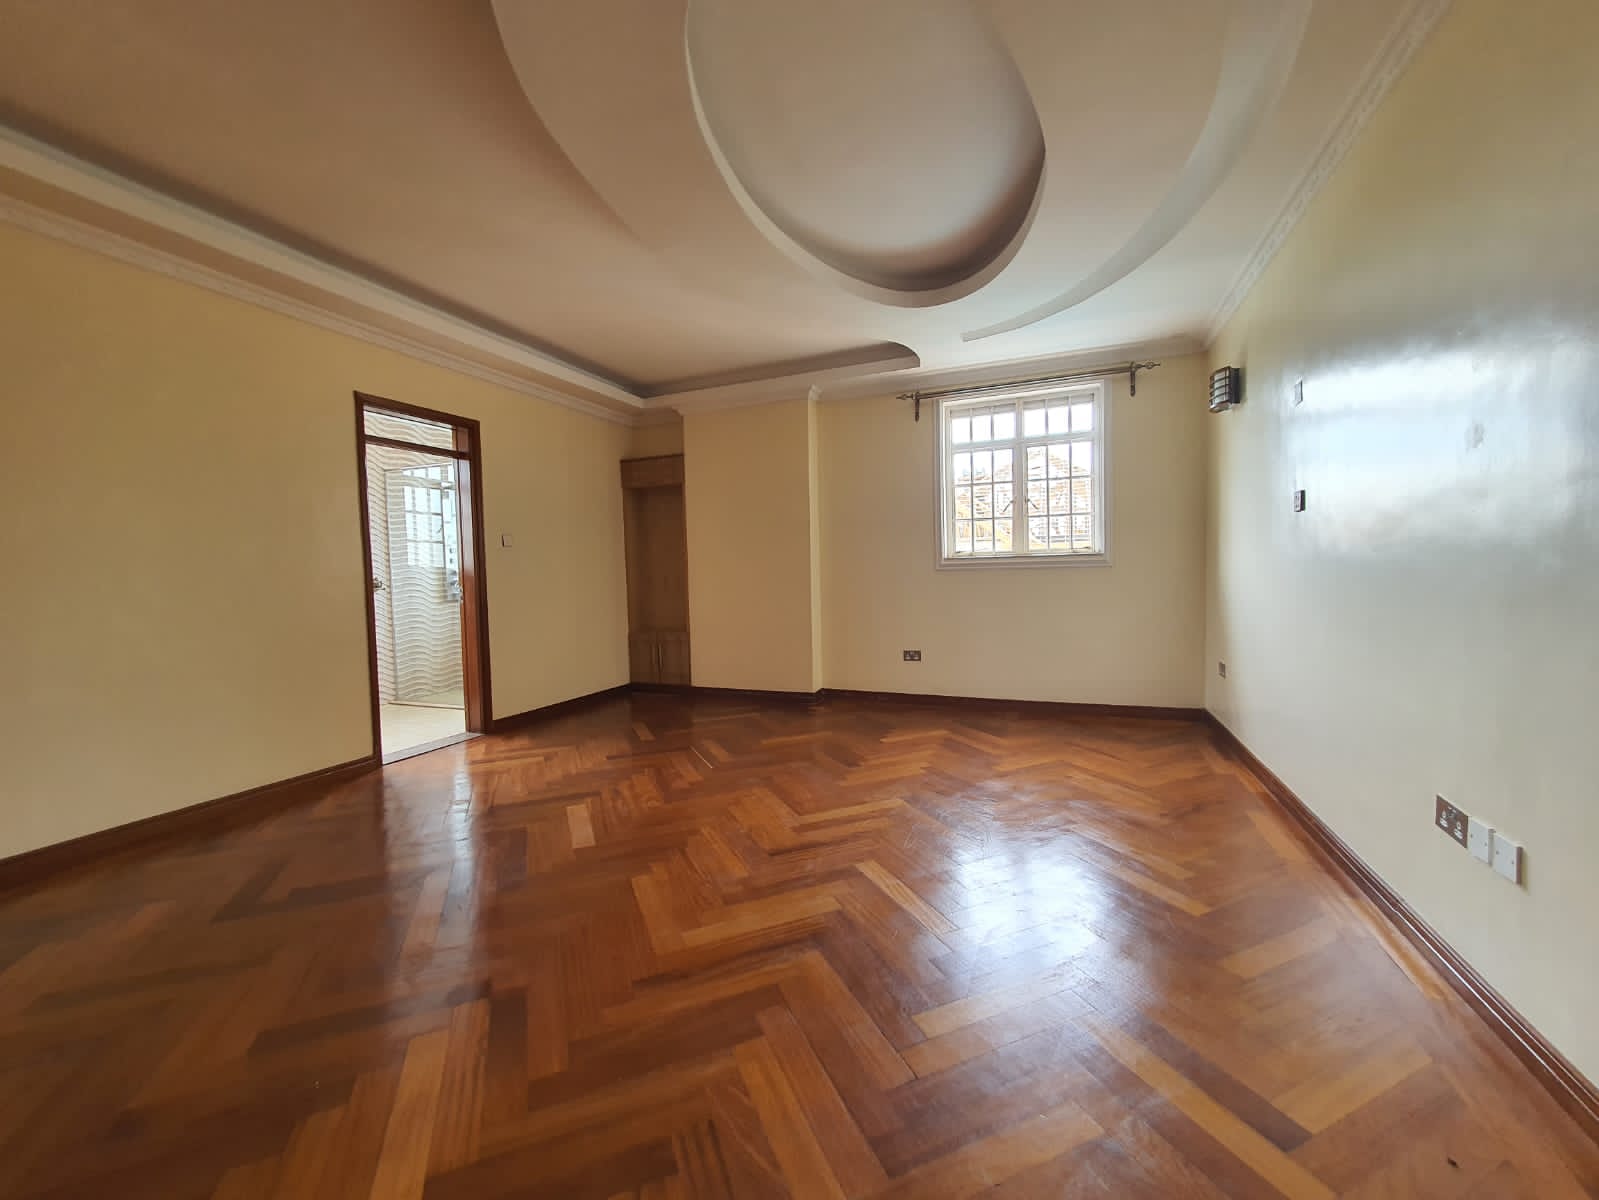 Lovely 8 Bedroom House For Rent with a Guest Wing in Runda, Nairobi. located close to Village Market, UN offices in Nairobi, Gigiri, Schools. Musilli Homes